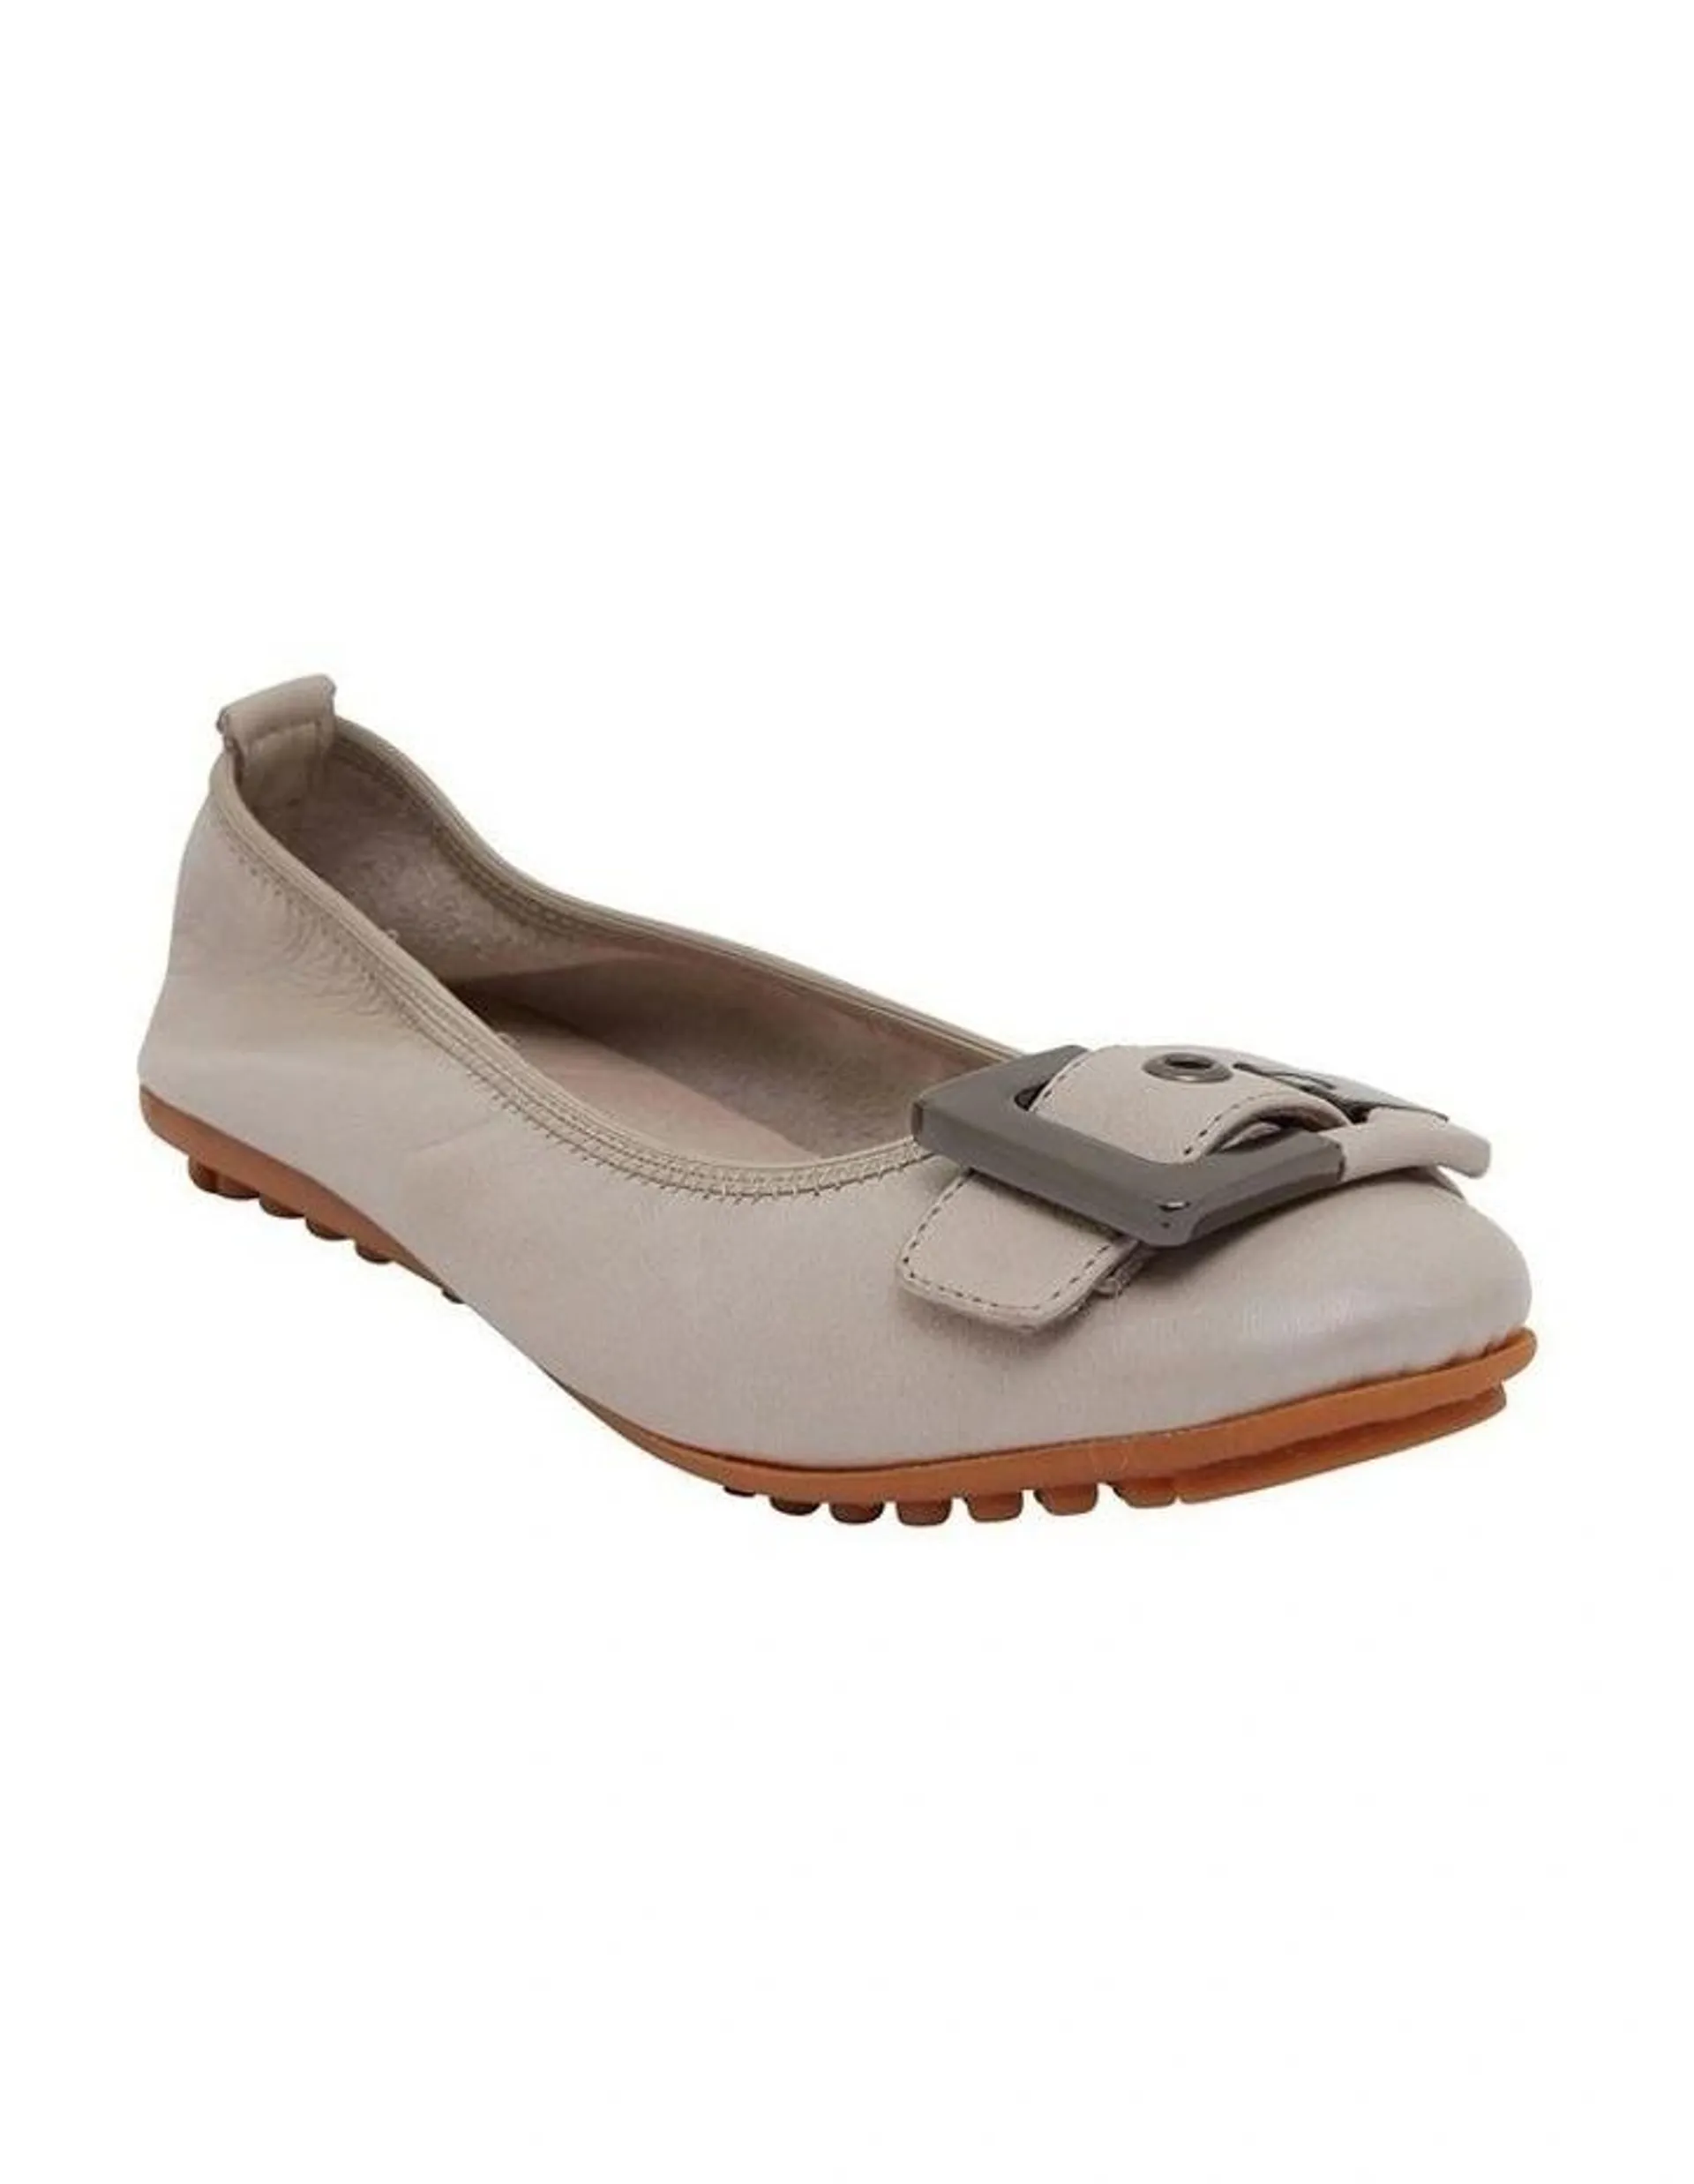 Pentagon Flat Shoes in Taupe Leather